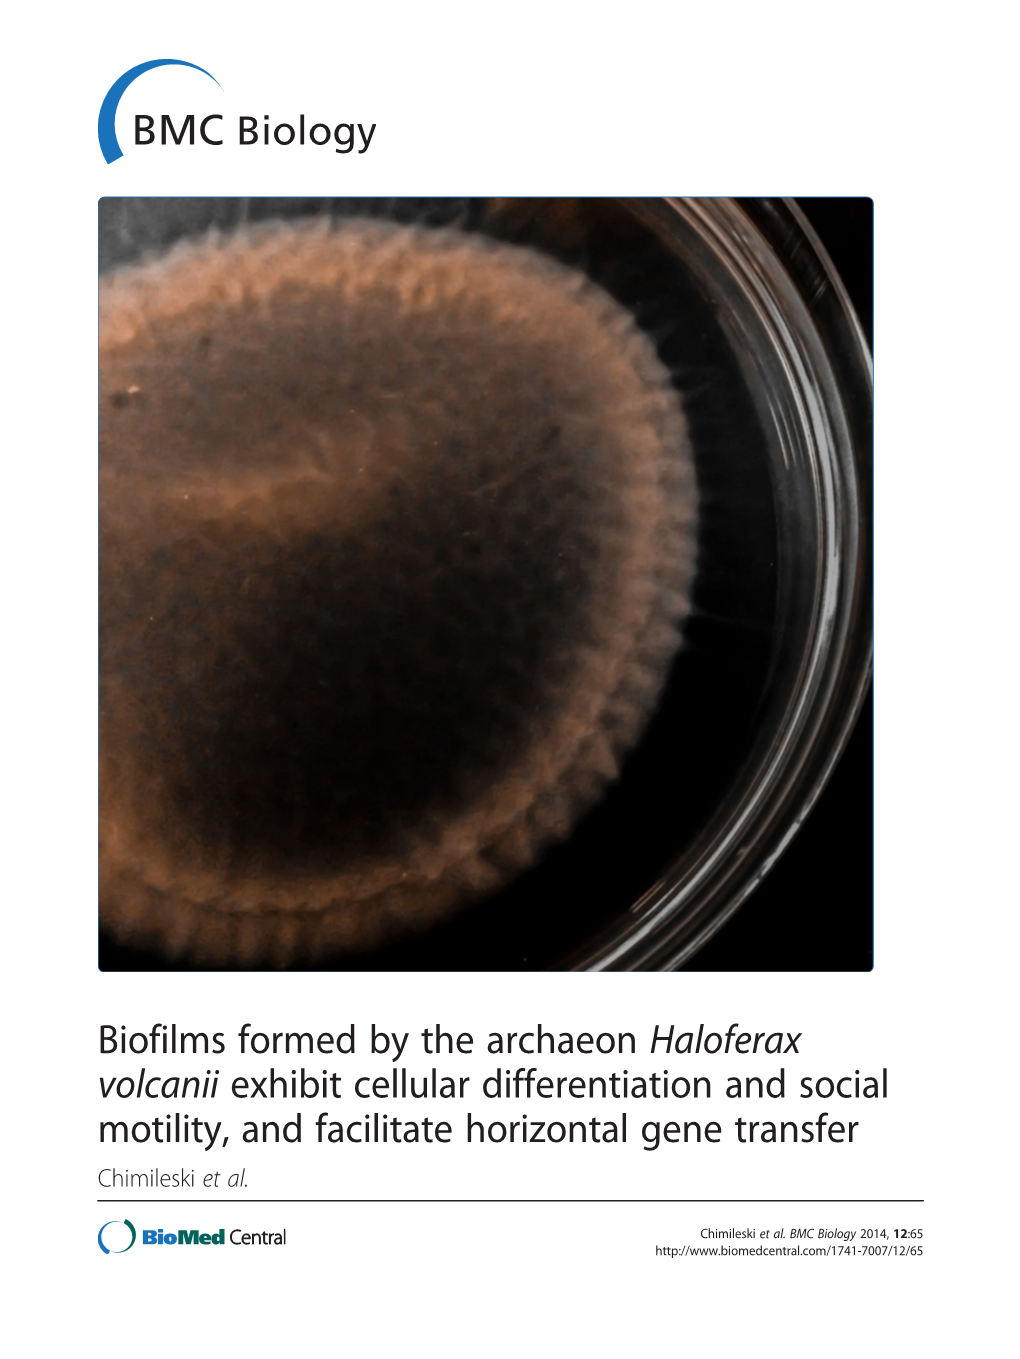 Biofilms Formed by the Archaeon Haloferax Volcanii Exhibit Cellular Differentiation and Social Motility, and Facilitate Horizontal Gene Transfer Chimileski Et Al